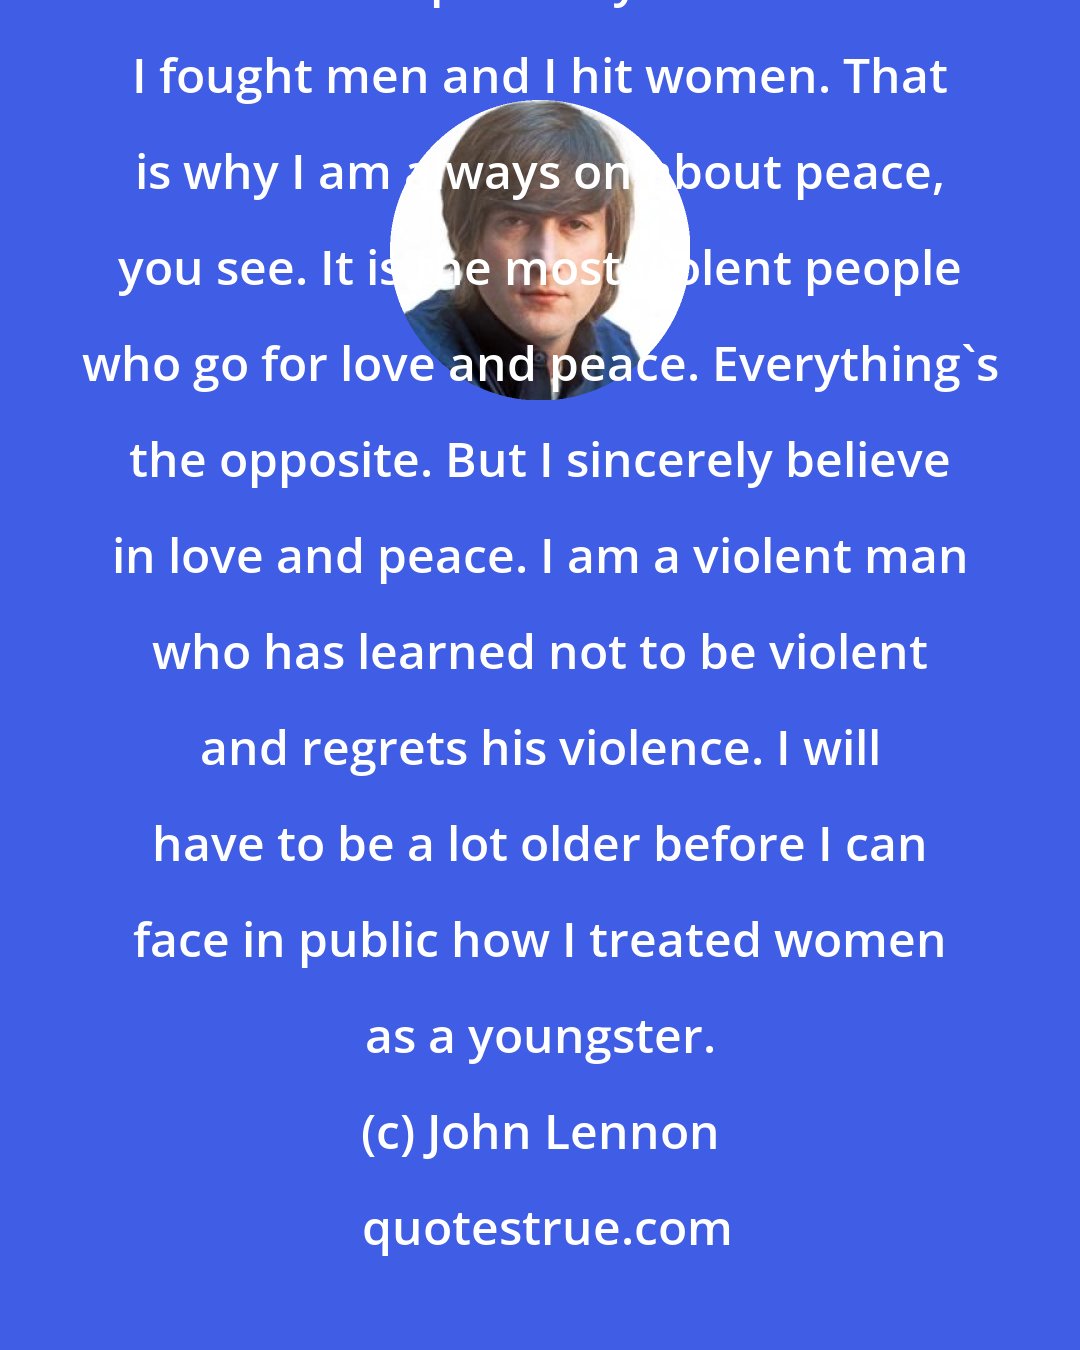 John Lennon: I used to be cruel to my woman, and physically - any woman. I was a hitter. I couldn't express myself and I hit. I fought men and I hit women. That is why I am always on about peace, you see. It is the most violent people who go for love and peace. Everything's the opposite. But I sincerely believe in love and peace. I am a violent man who has learned not to be violent and regrets his violence. I will have to be a lot older before I can face in public how I treated women as a youngster.